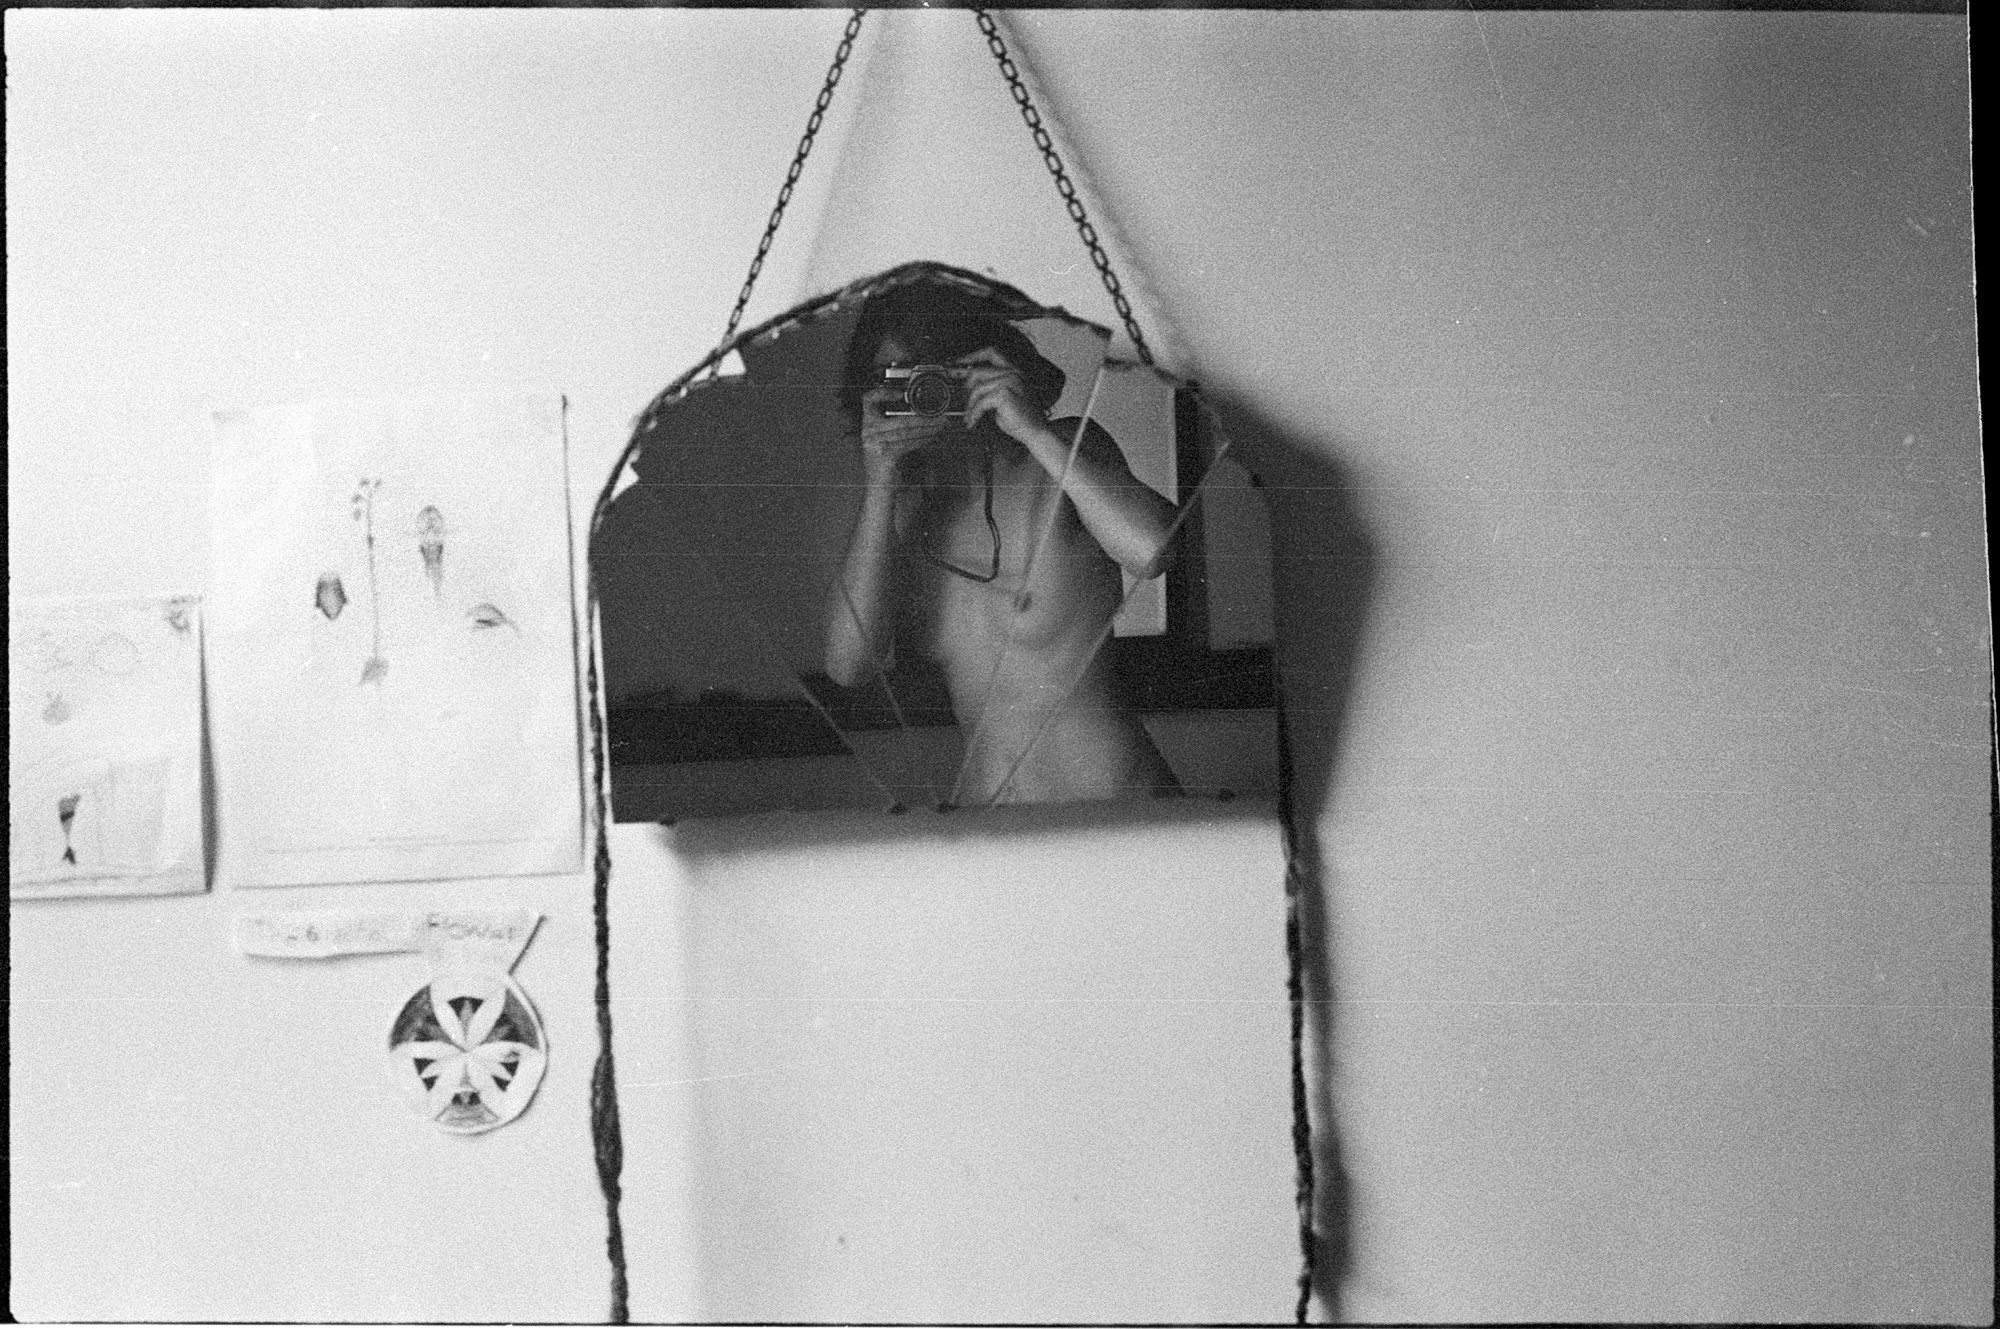 Ruth Maddison, <em>(Self Portrait #7) First roll of film</em>, 1976, archival pigment print, 2020, 26.3 x 40cm. Courtesy of the artist and the Centre for Contemporary Photography.